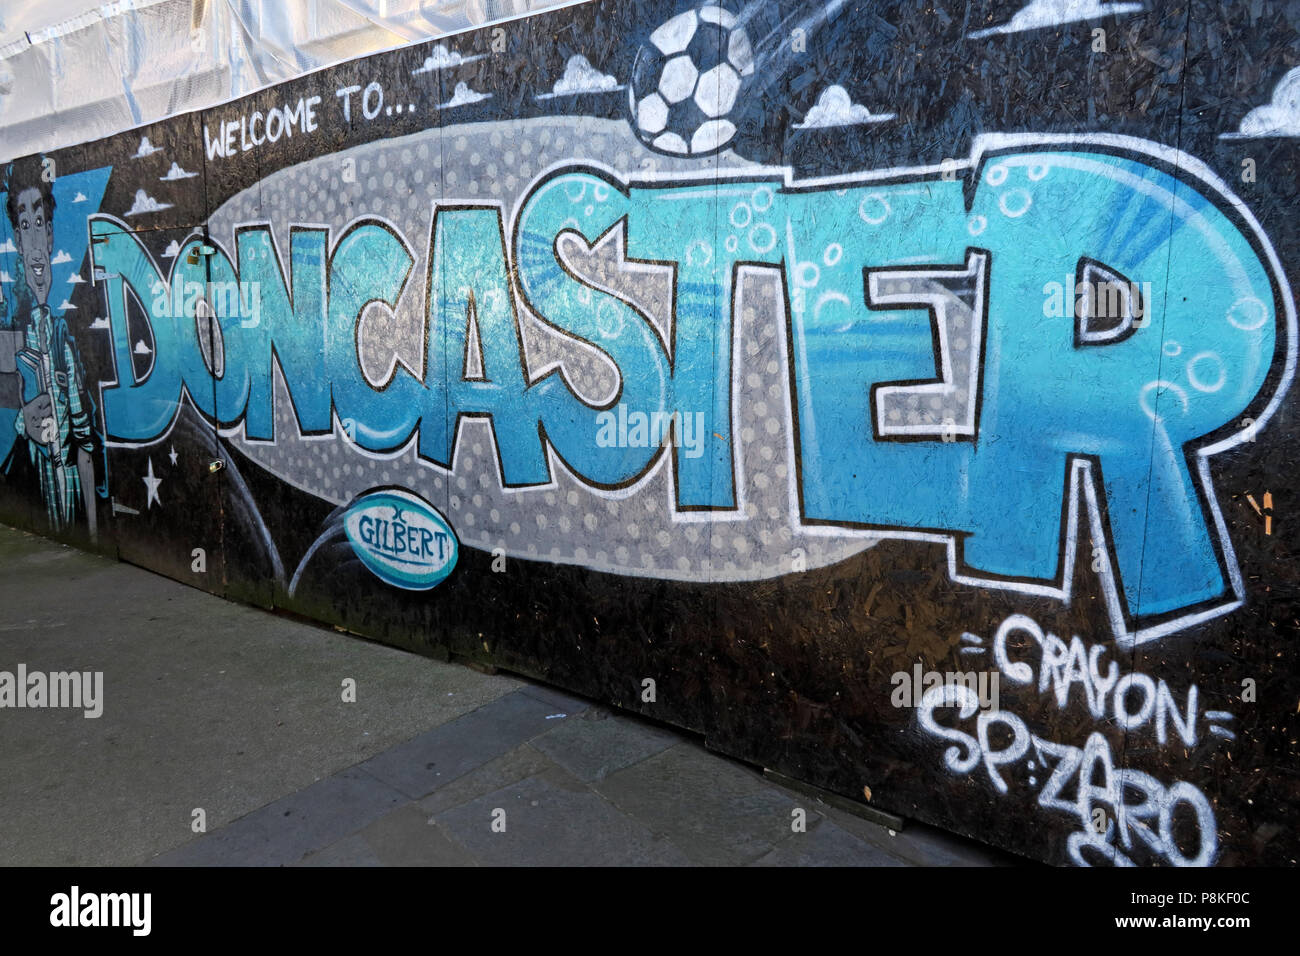 Welcome To Doncaster, South Yorkshire, England, UK Stock Photo